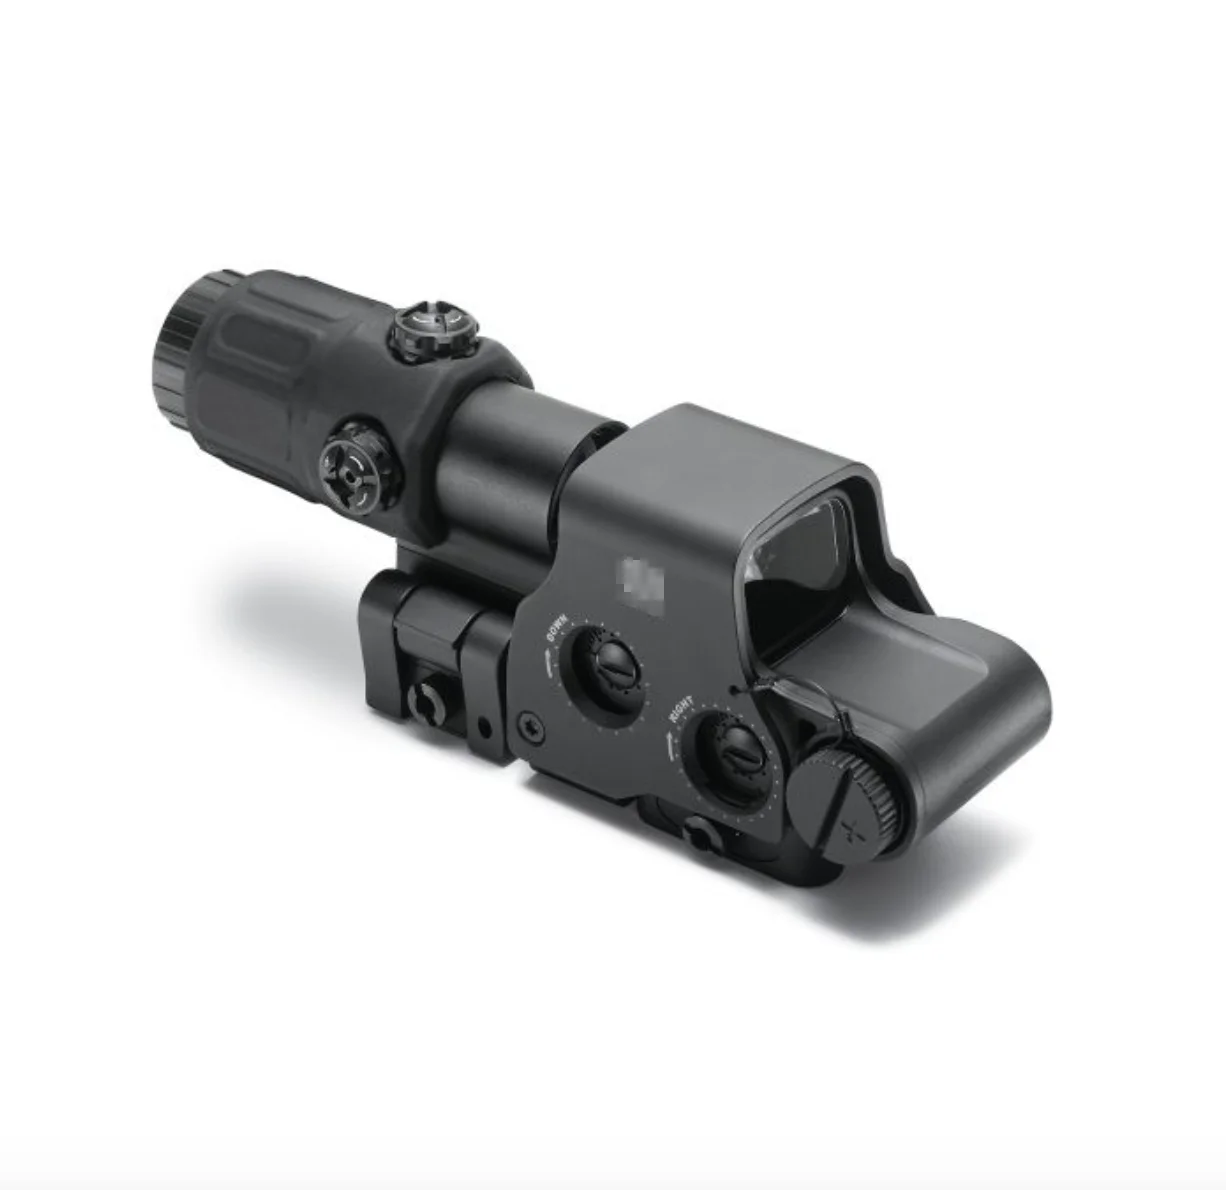 

Tactical 558 Red Dot Sight G33 3X Magnifier Holographic Scope Hunting Reflex Sights For 20mm Weaver Rail Mount Airsoft Rifle